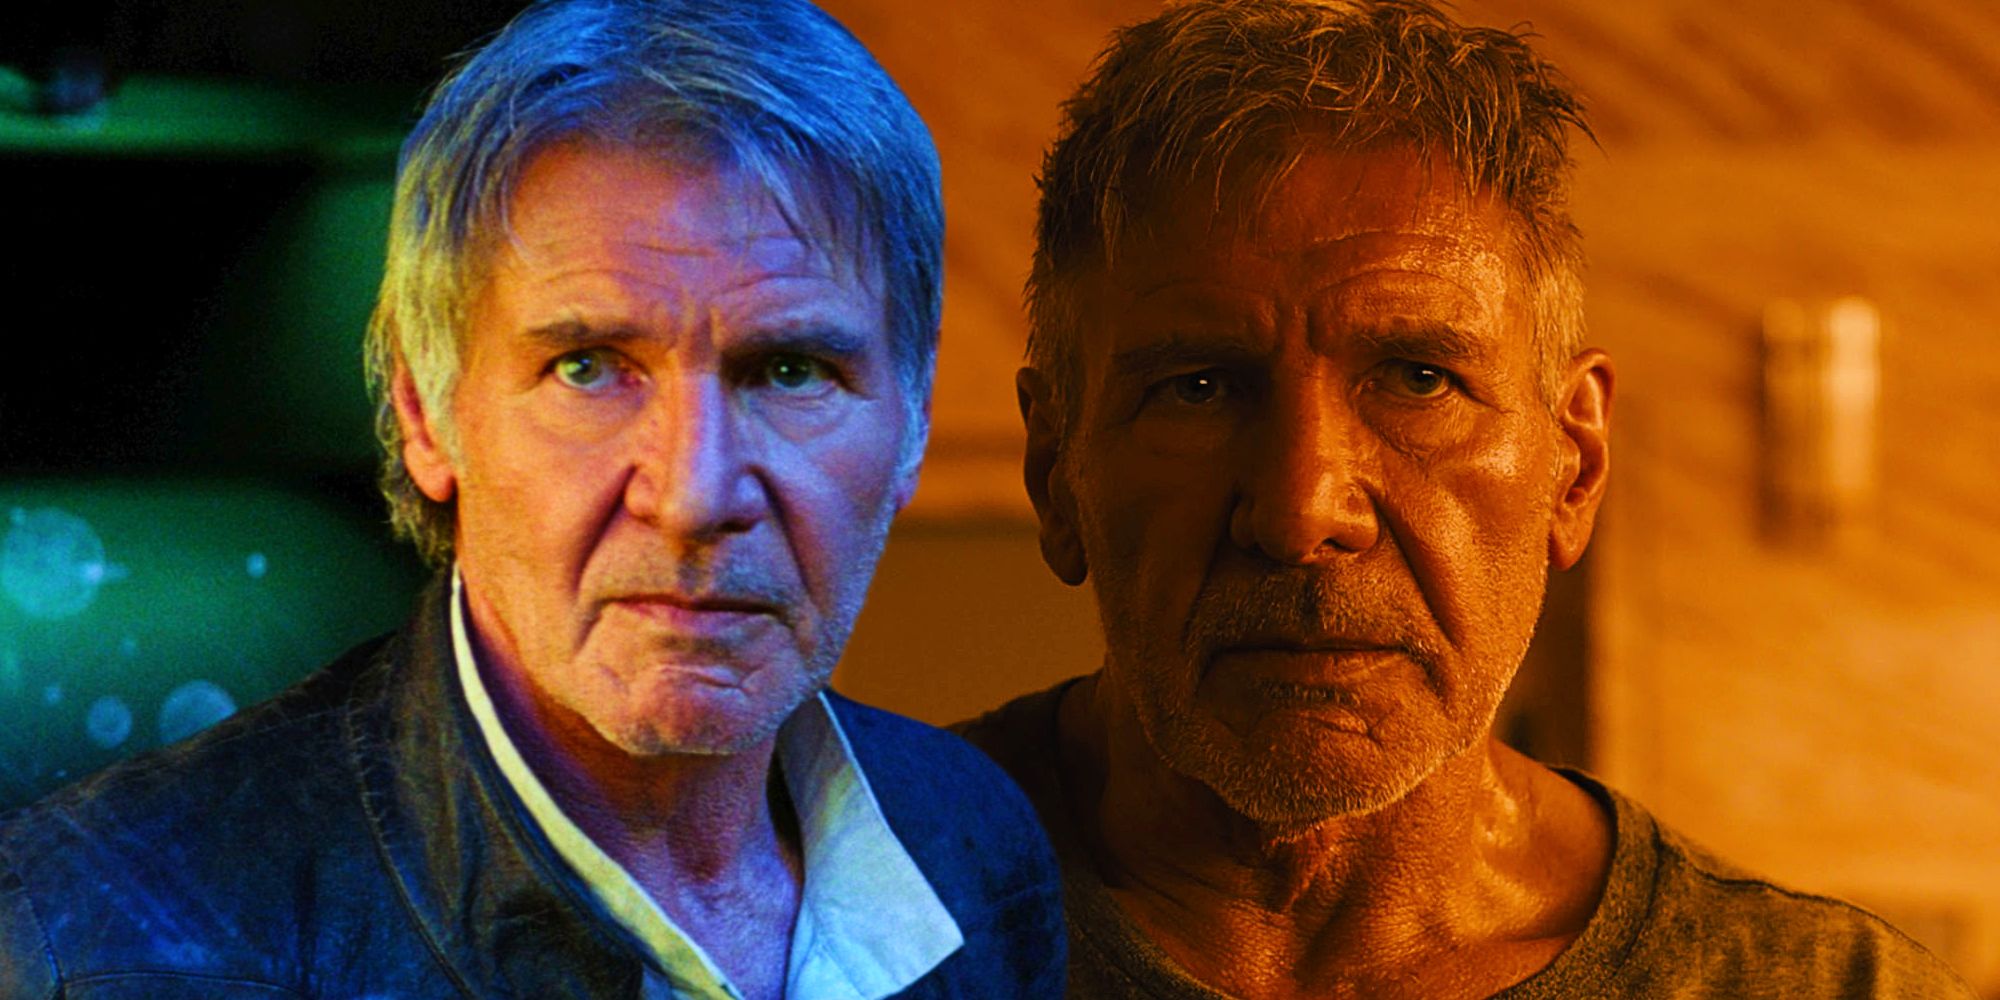 Harrison Ford as Han Solo in The Force Awakens and as Deckard in Blade Runner 2049